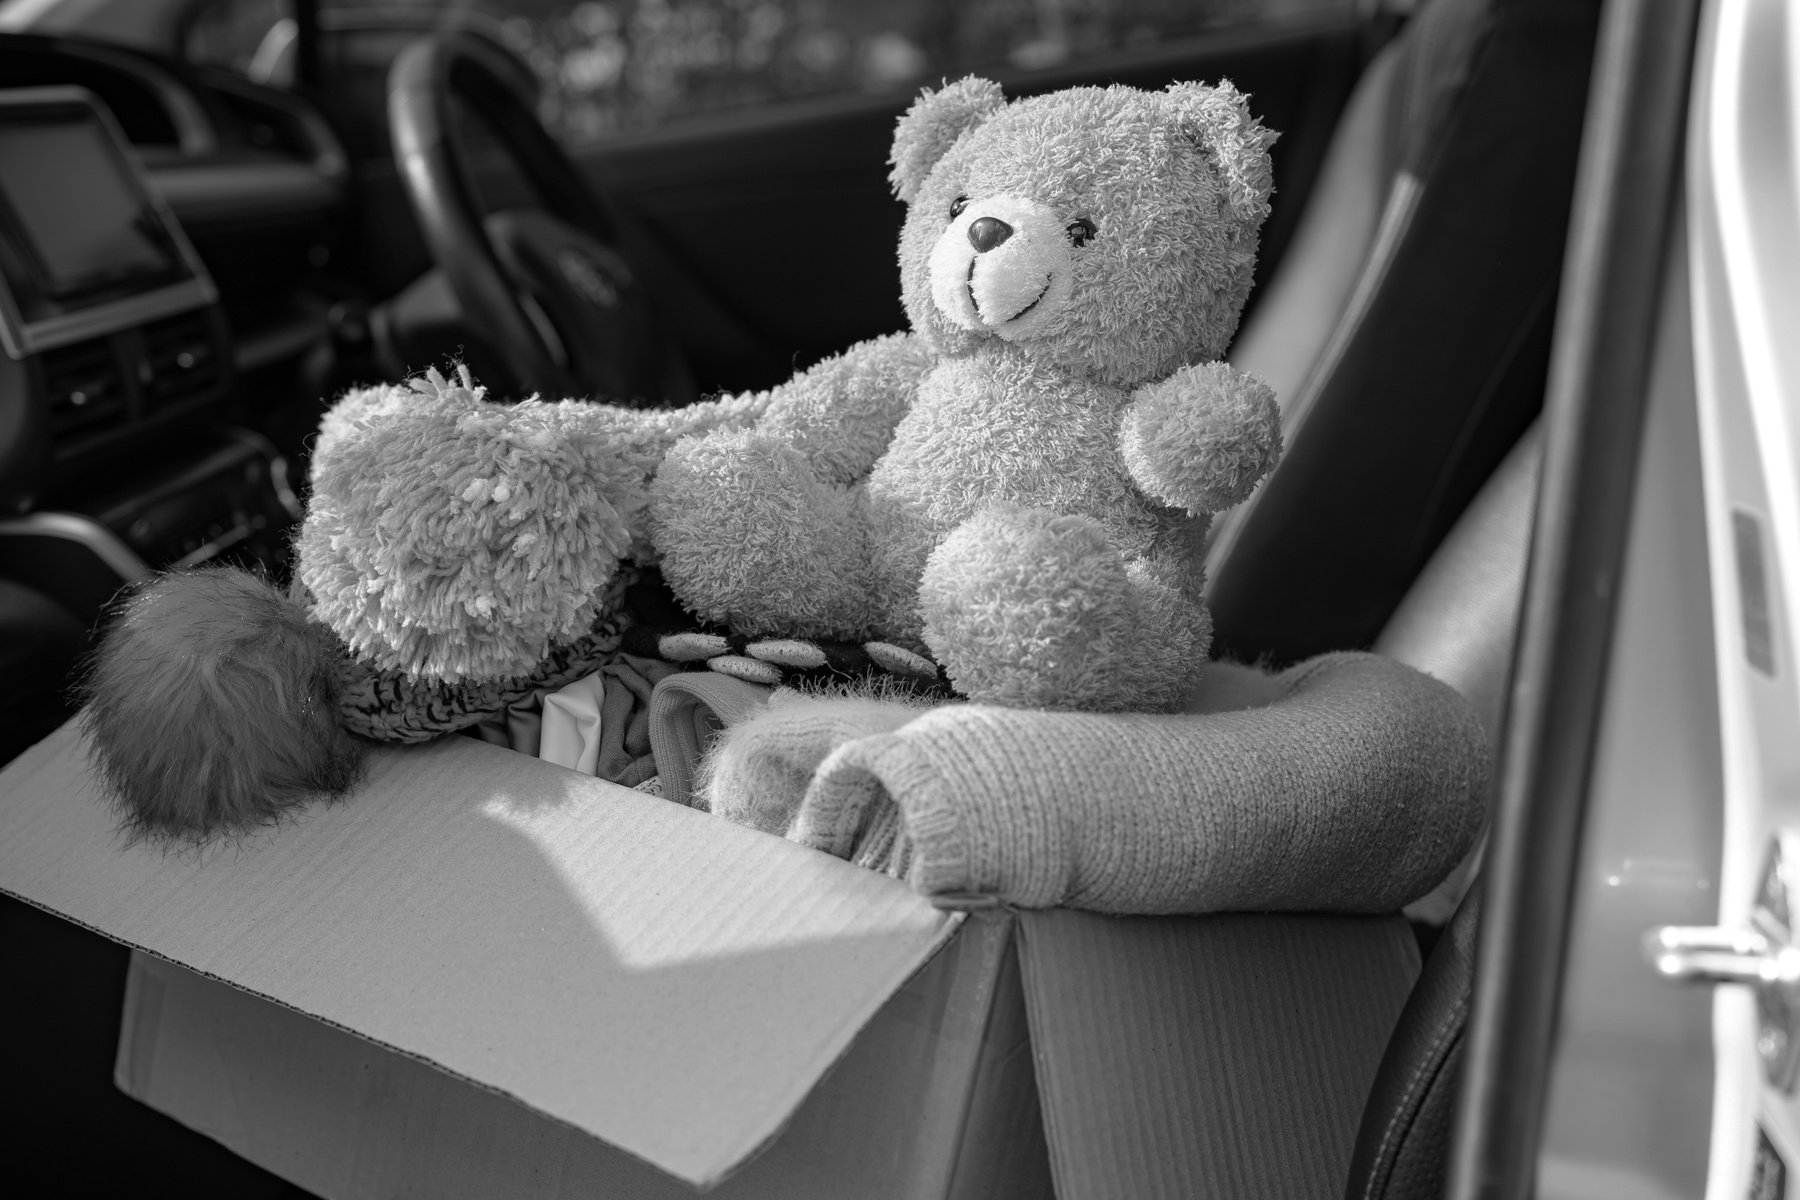 a black and white photo of a teddy bear and a box of clothes